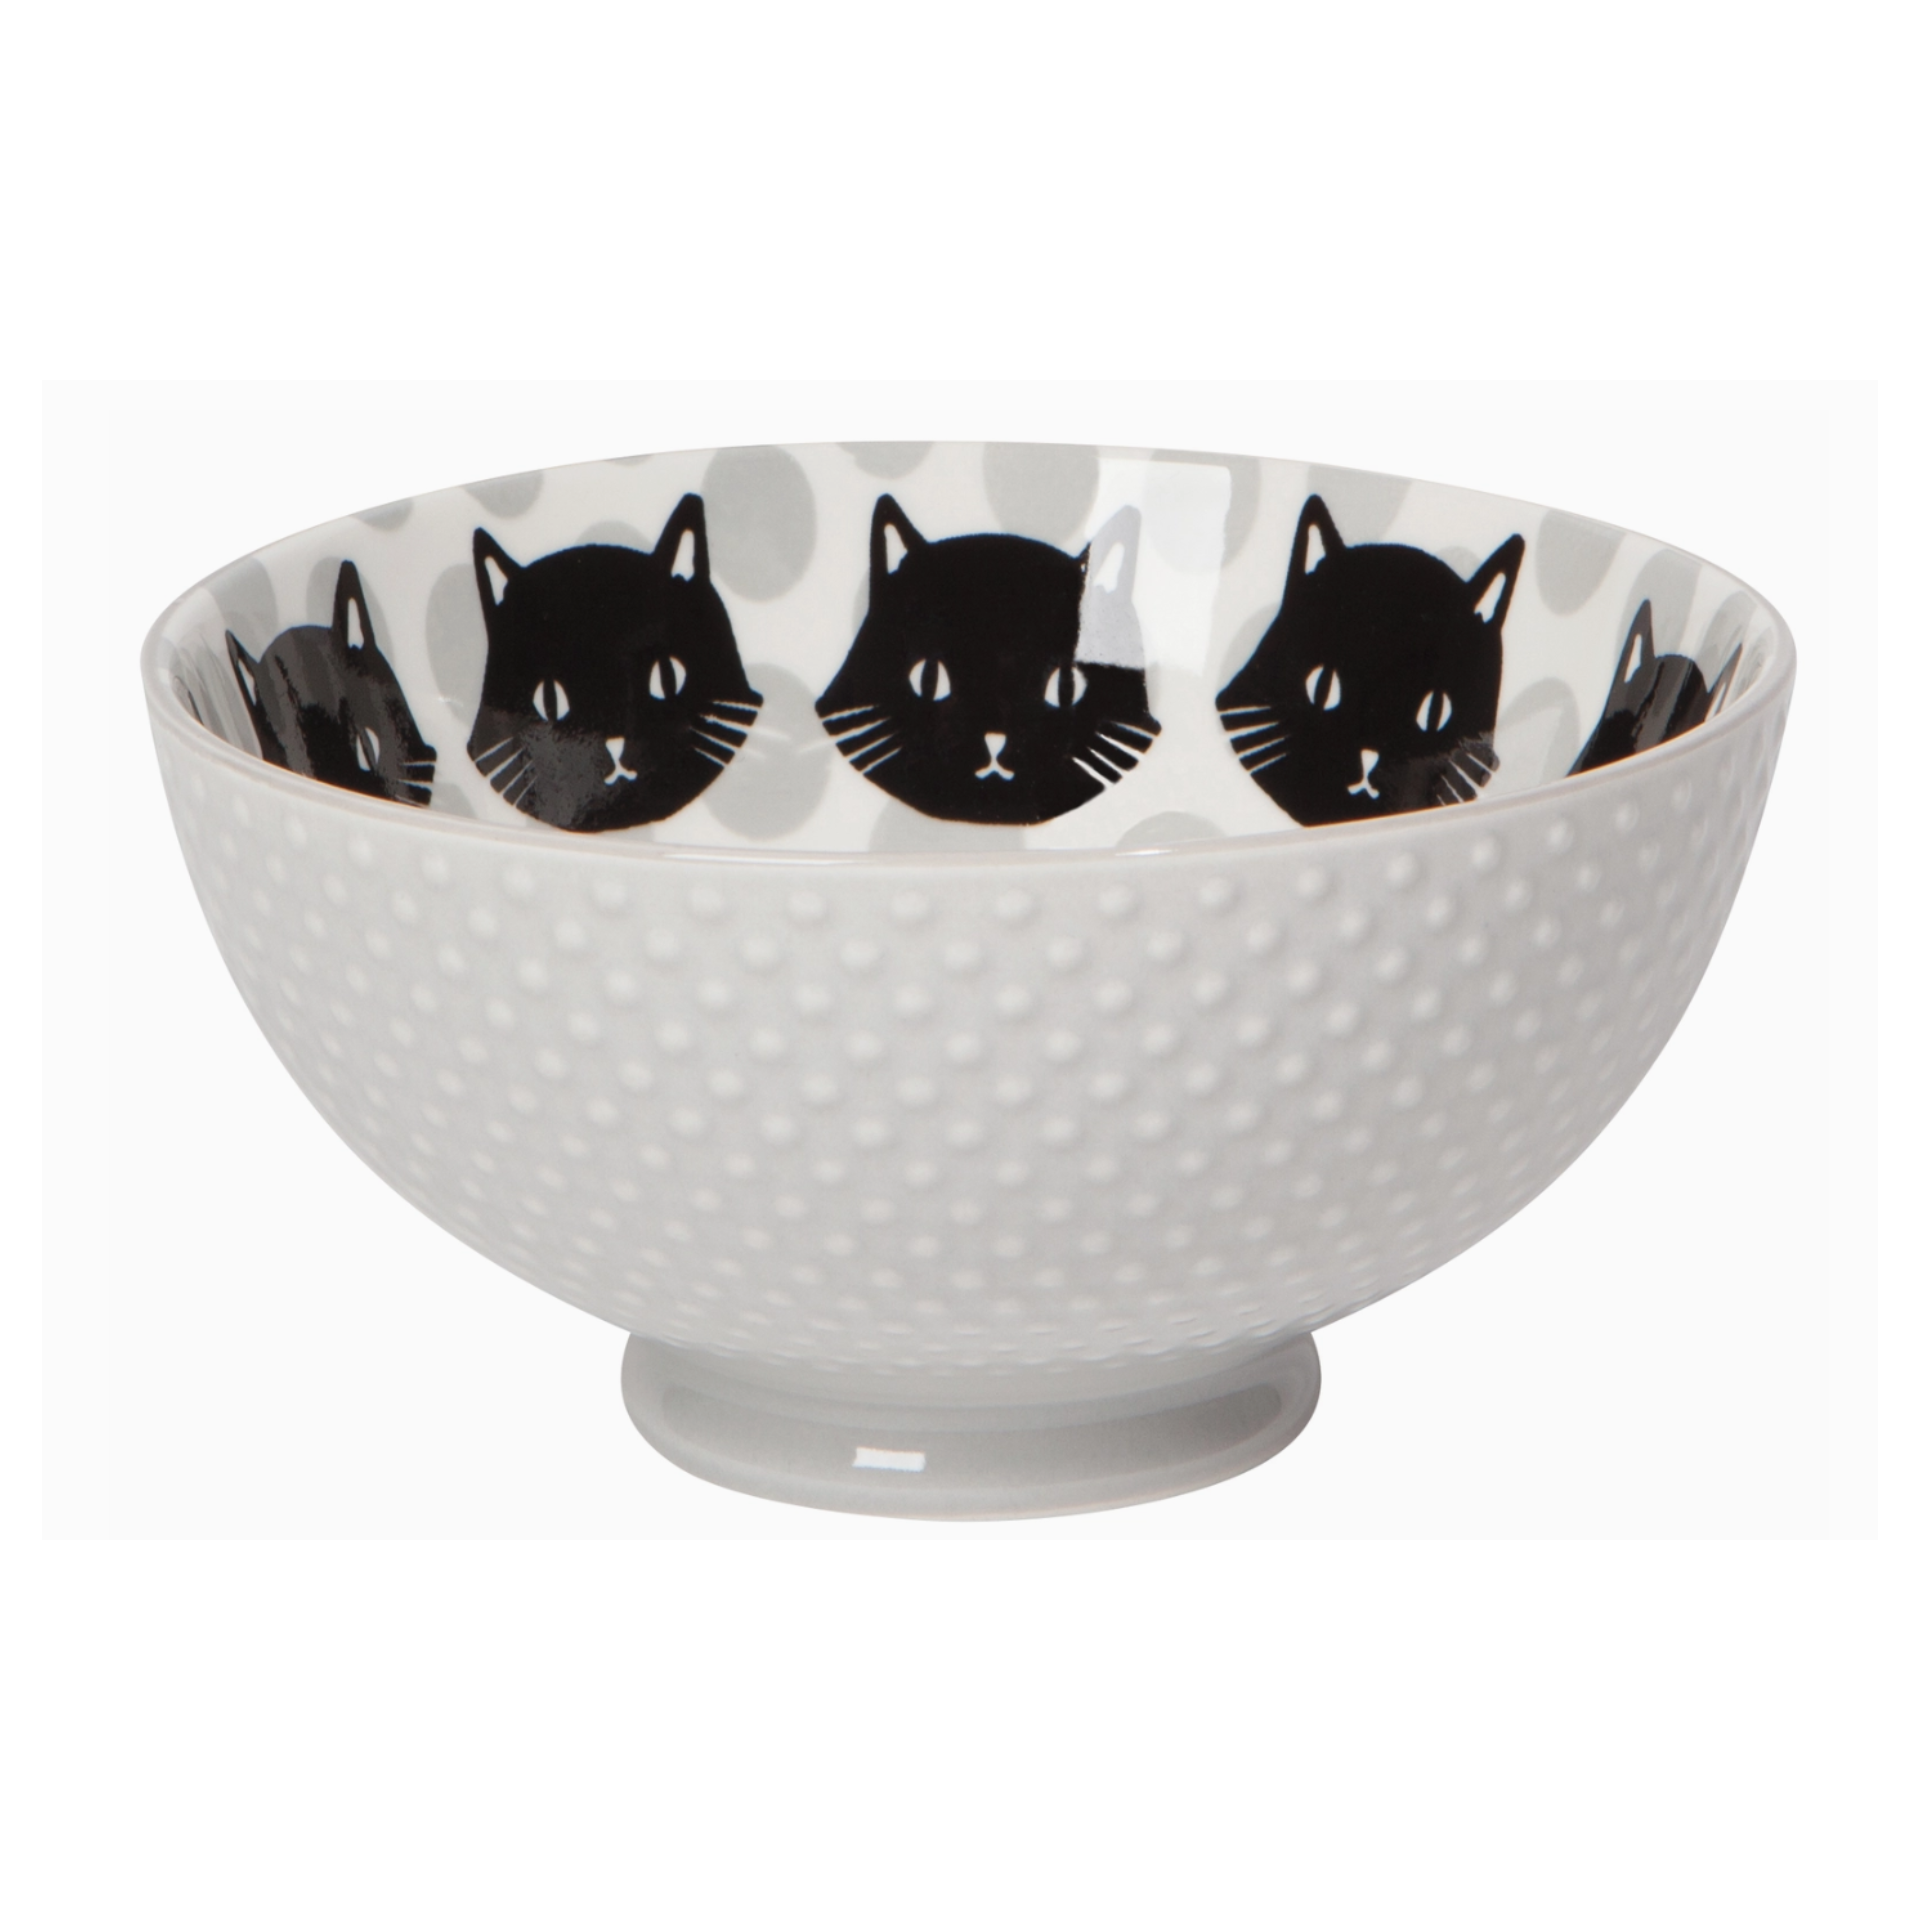 Black Cat Bowl: A whimsical addition to your kitchenware collection, featuring playful feline faces inside and embossed exterior texture